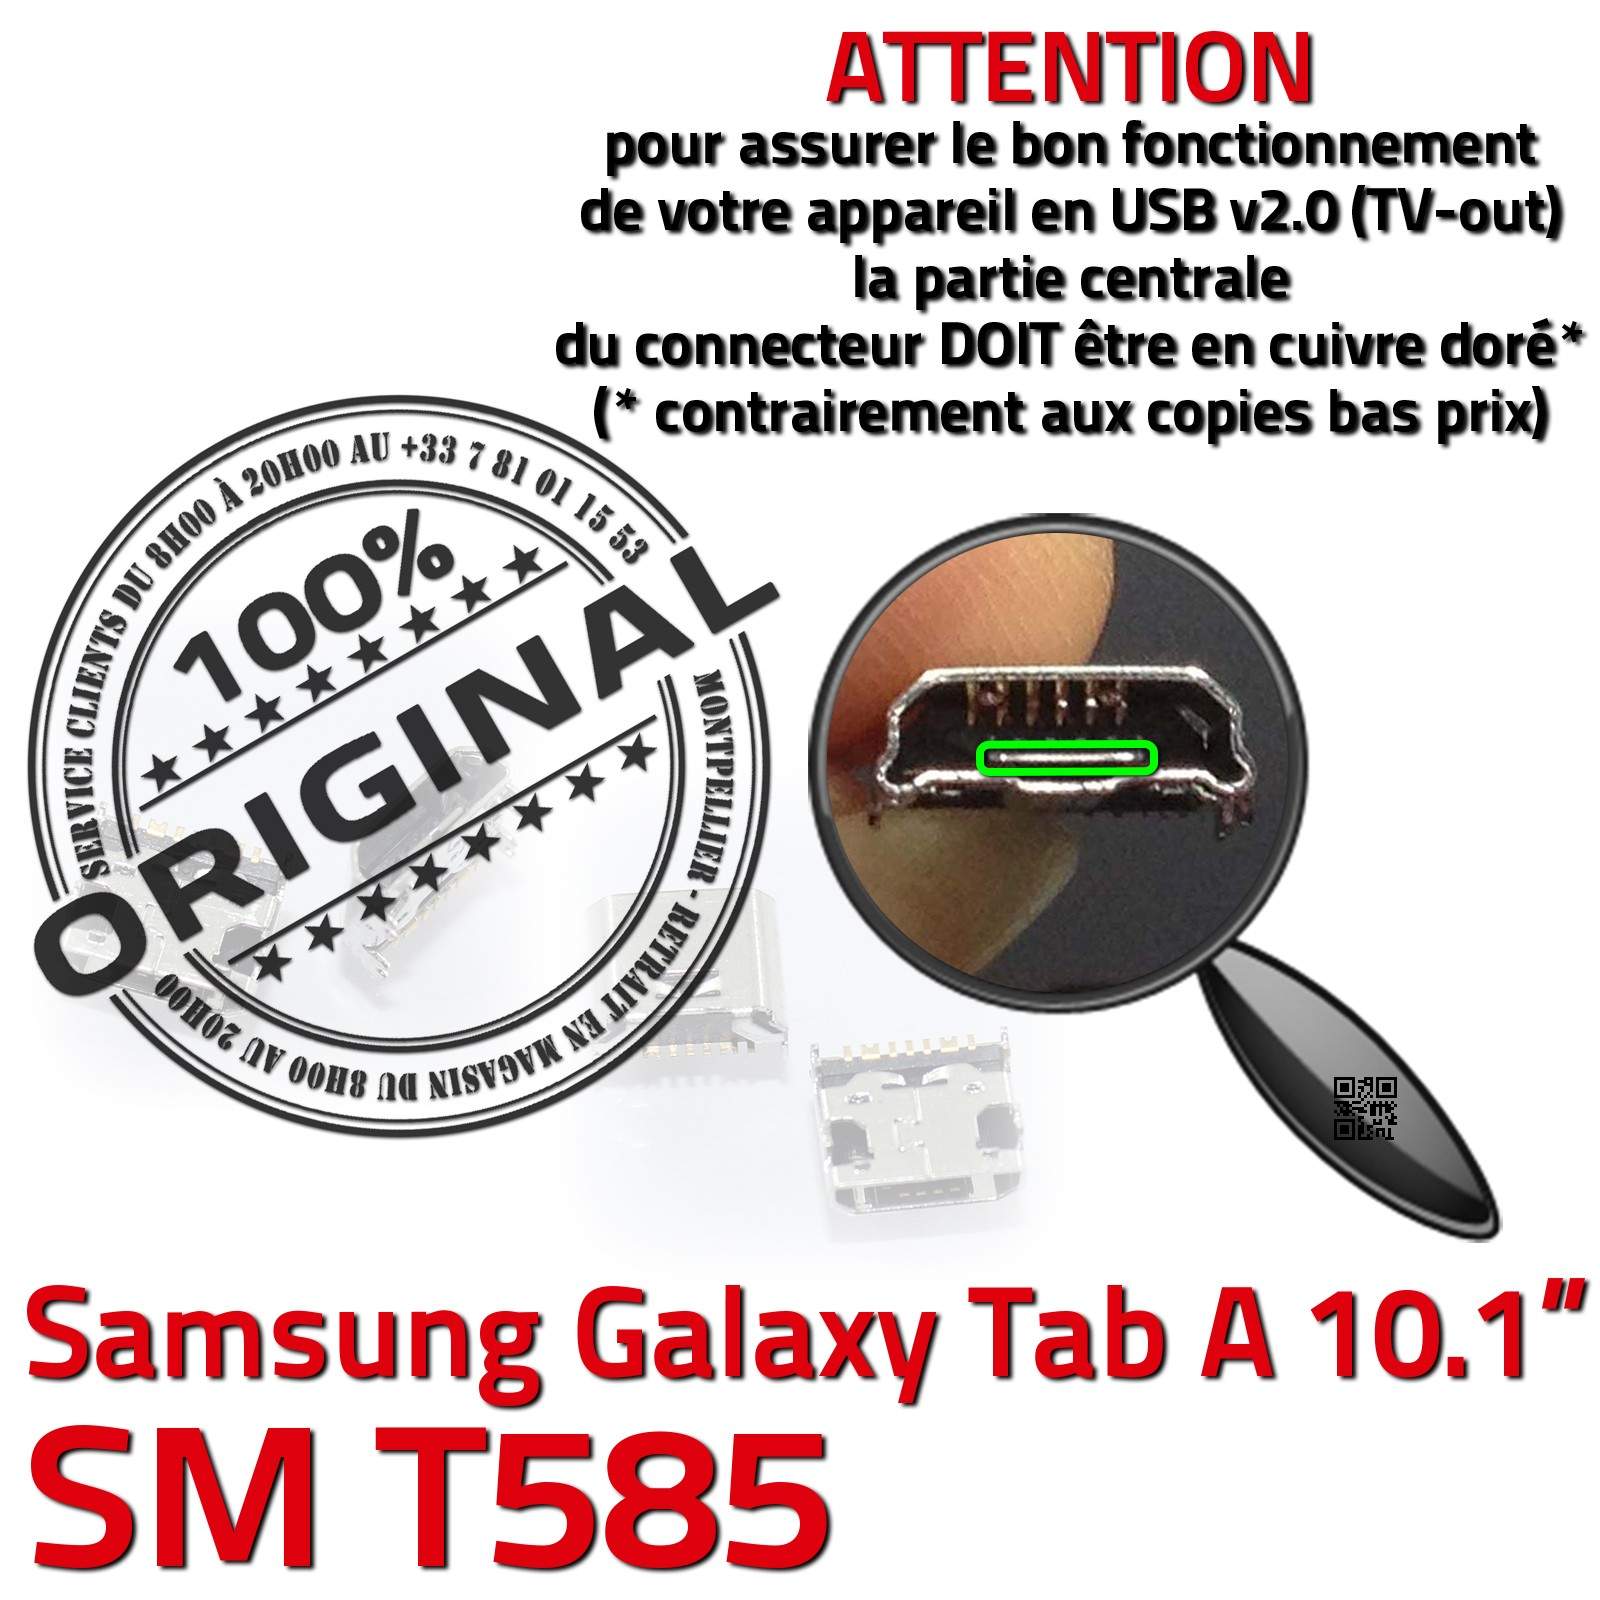 Chargeurs pour Samsung Galaxy Tab A 10.1 2019